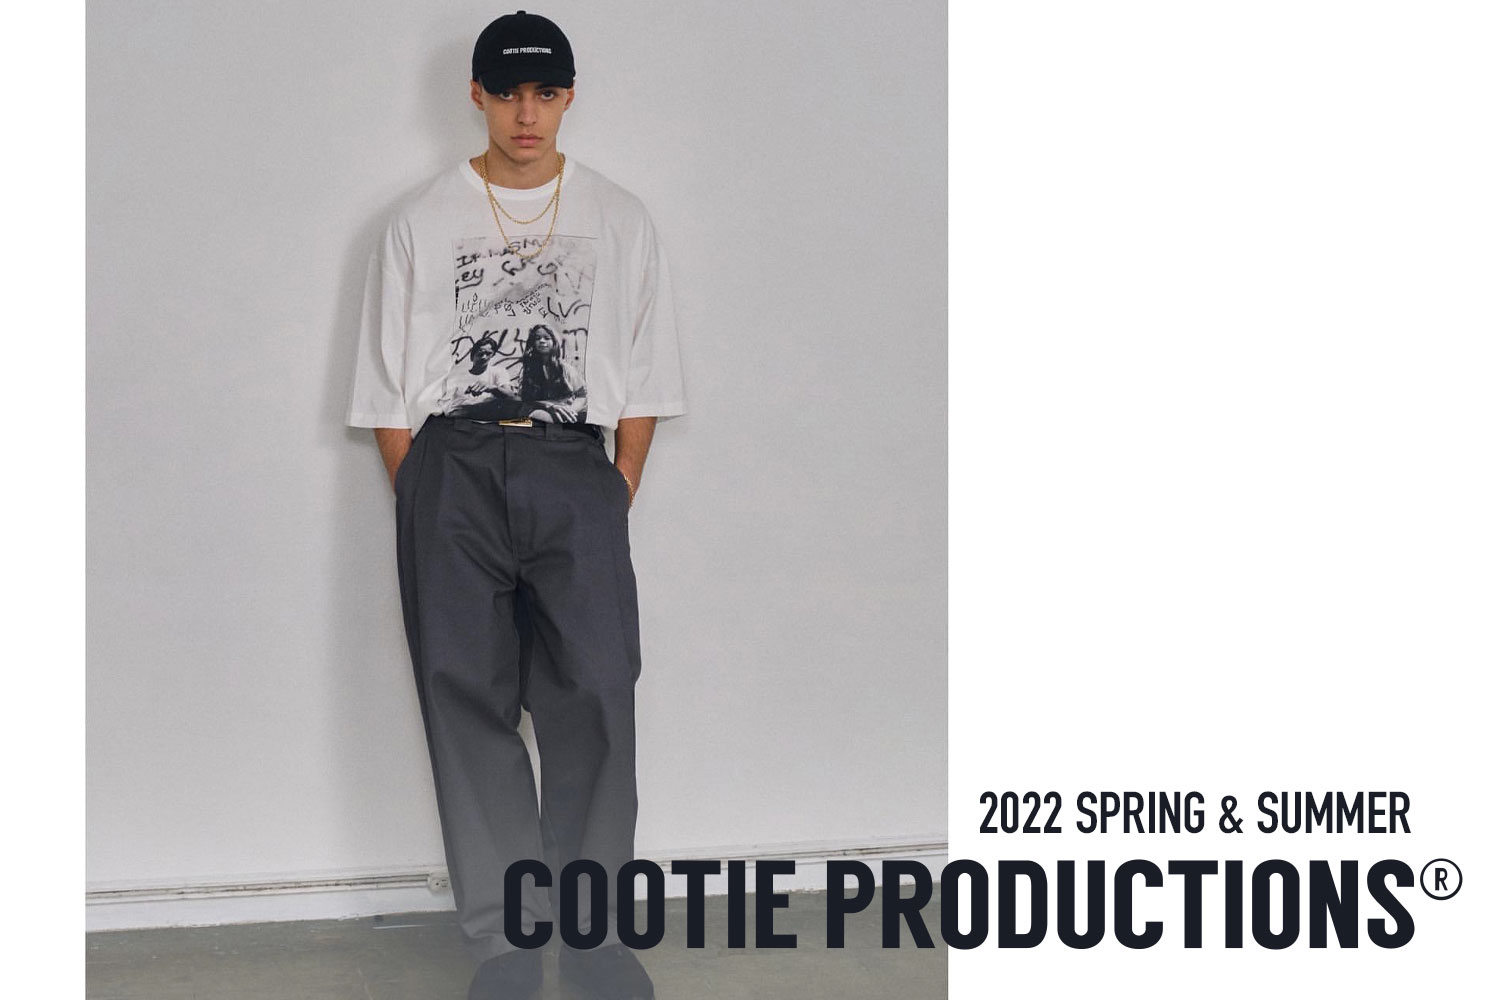 COOTIE PRODUCTIONS(クーティープロダクションズ)のスウェット